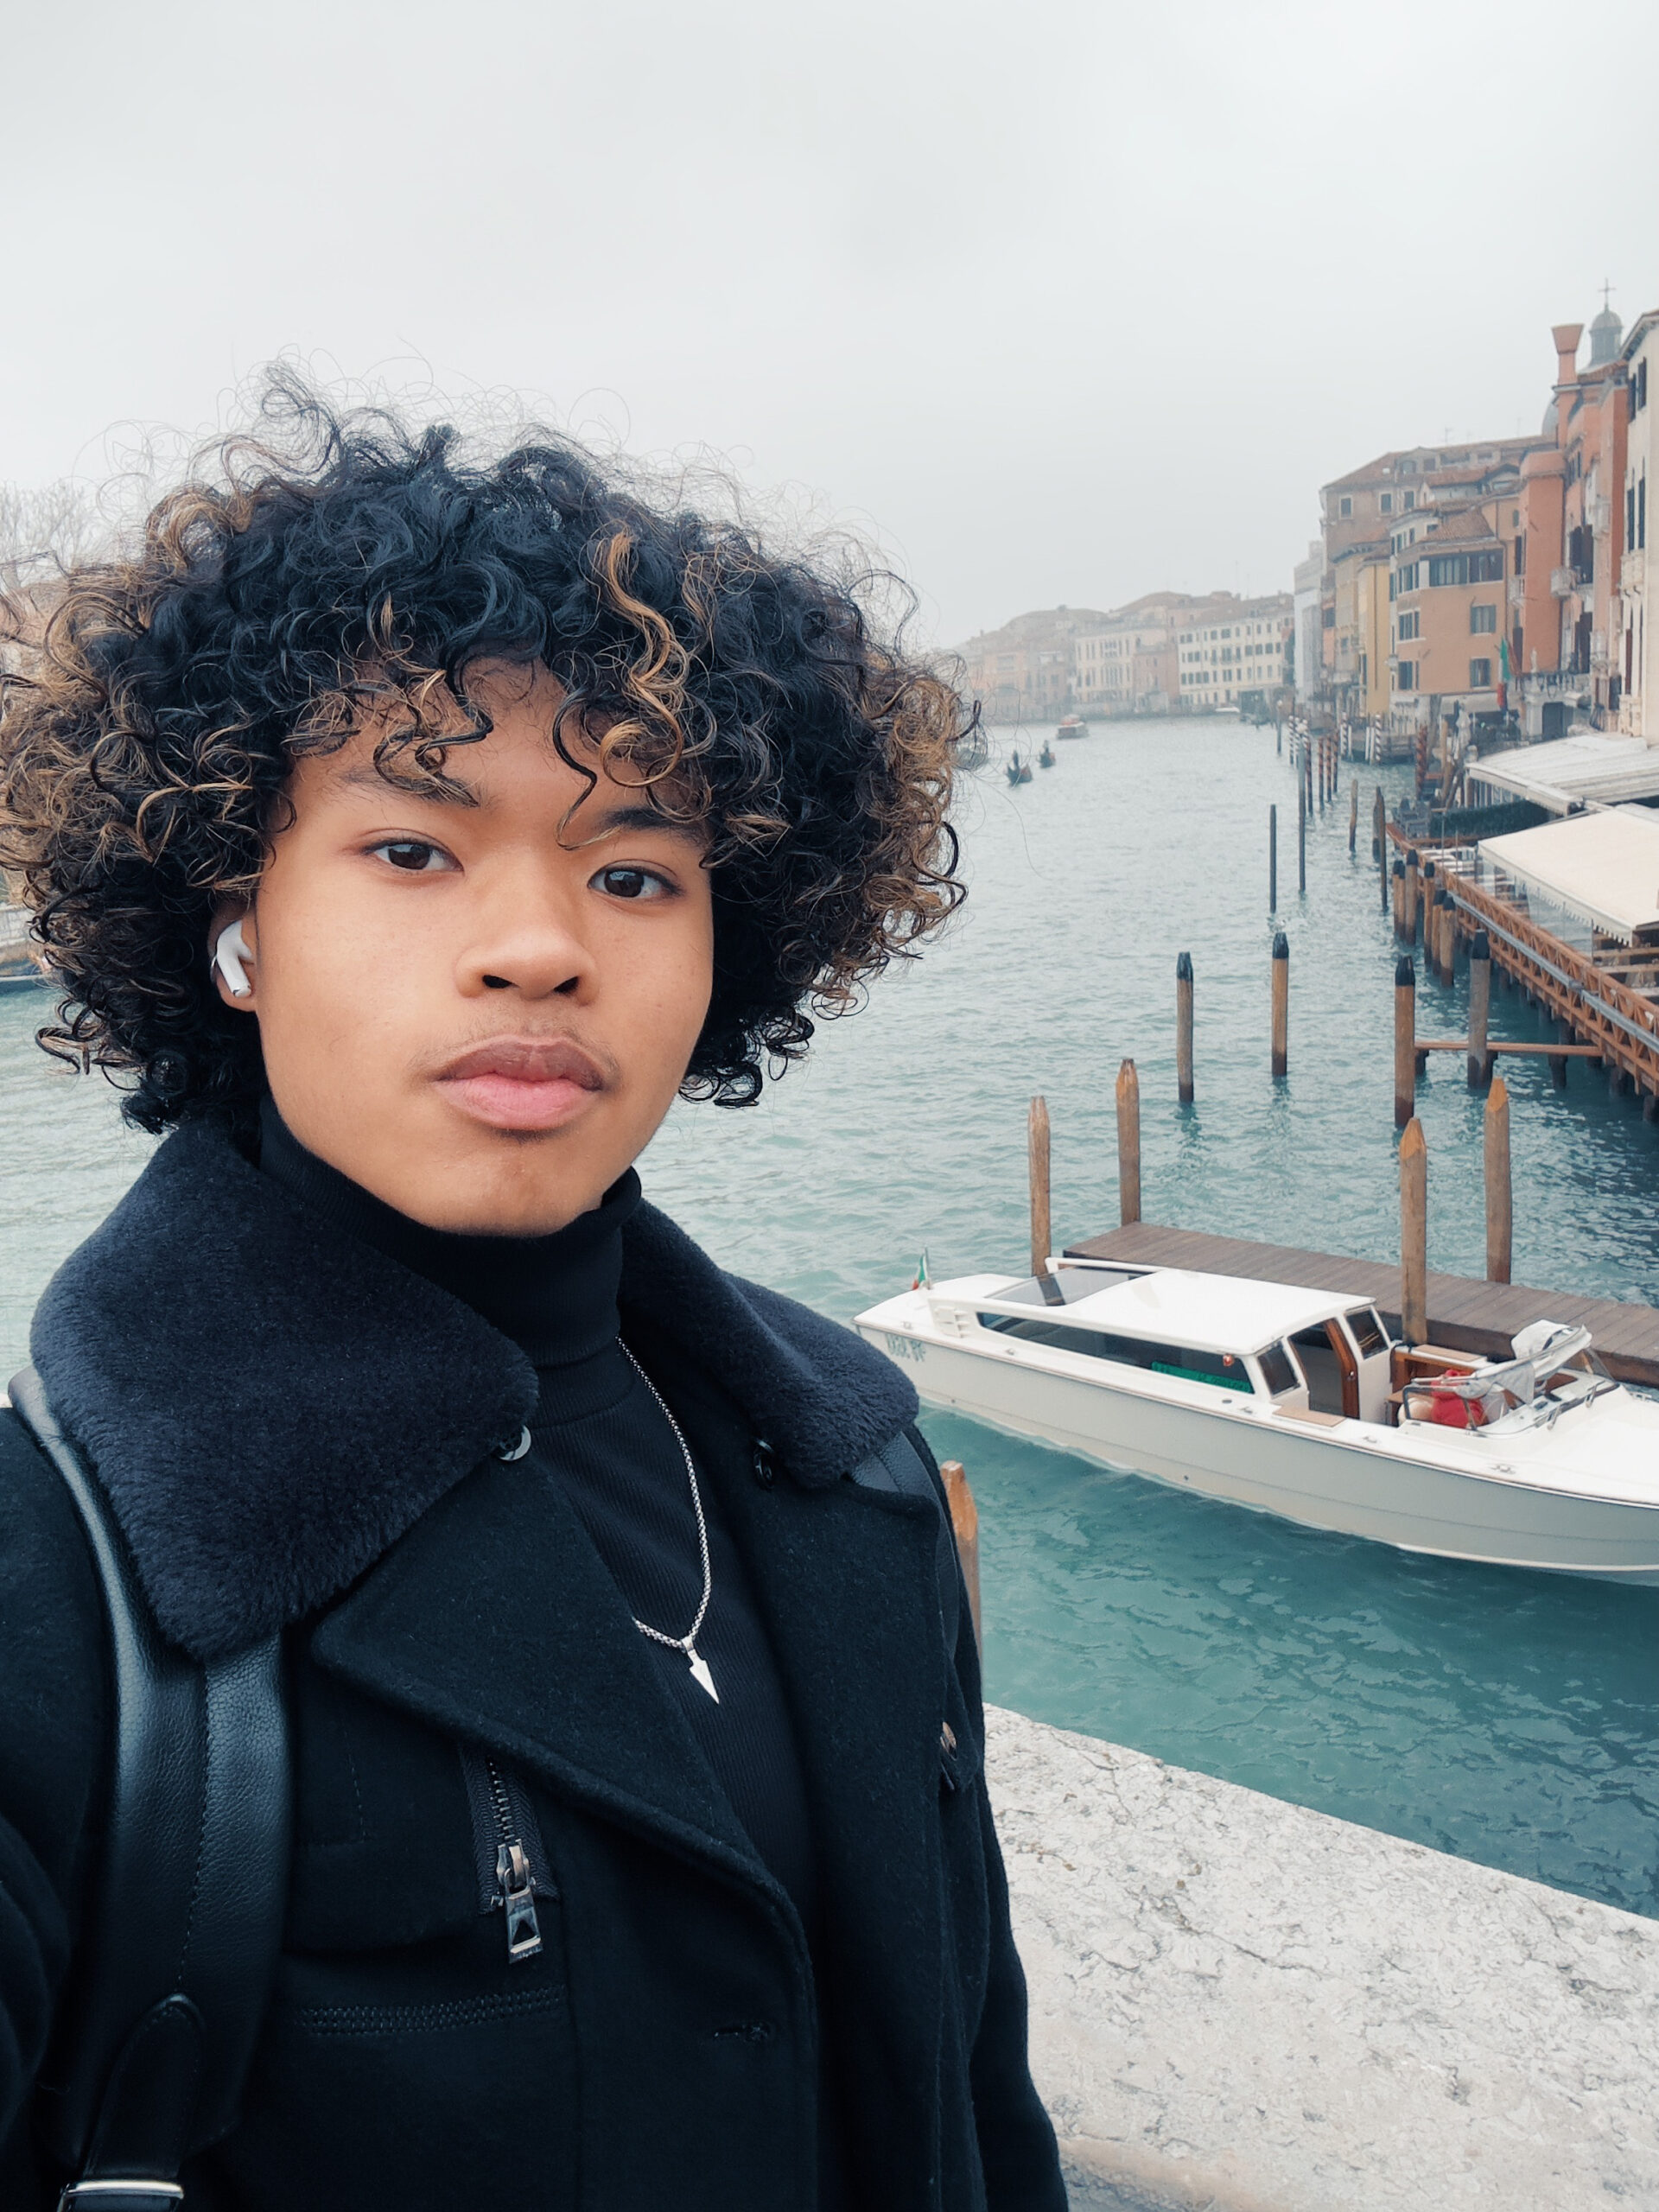 An NYU student of color standing in front of a canal in Venice.